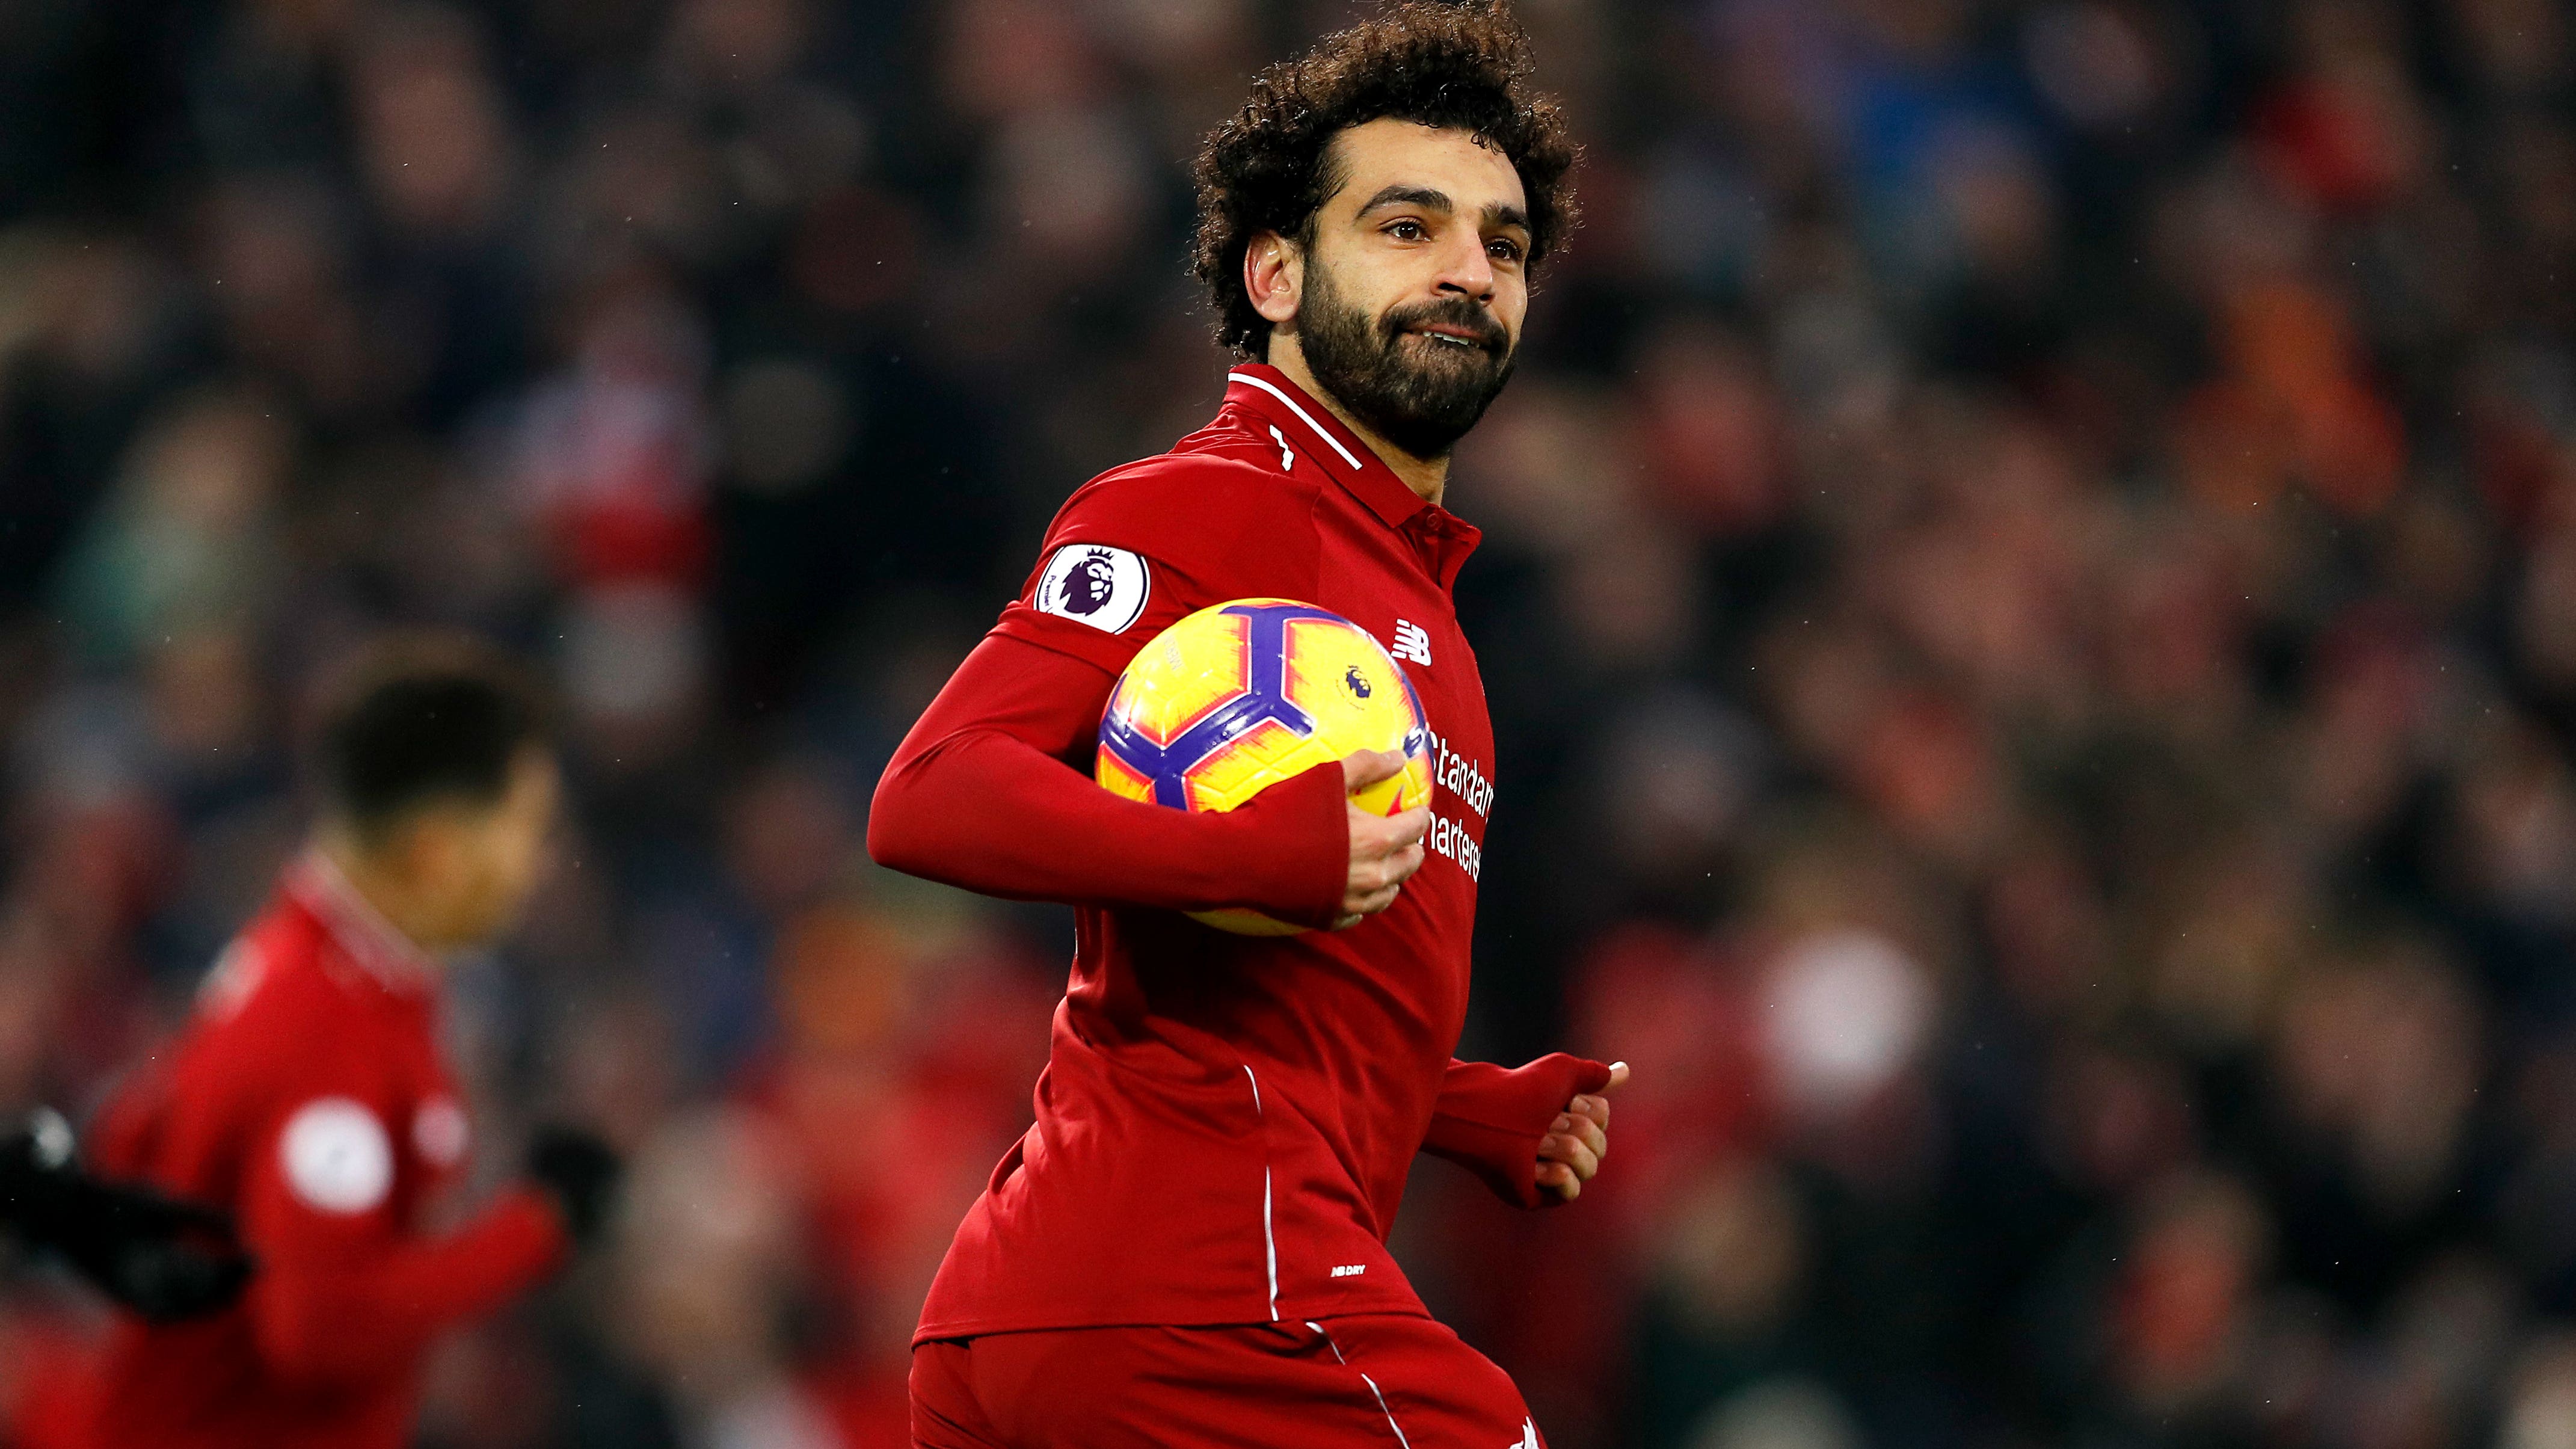 Liverpool forward Mohamed Salah could be out for a month with injury, says agent